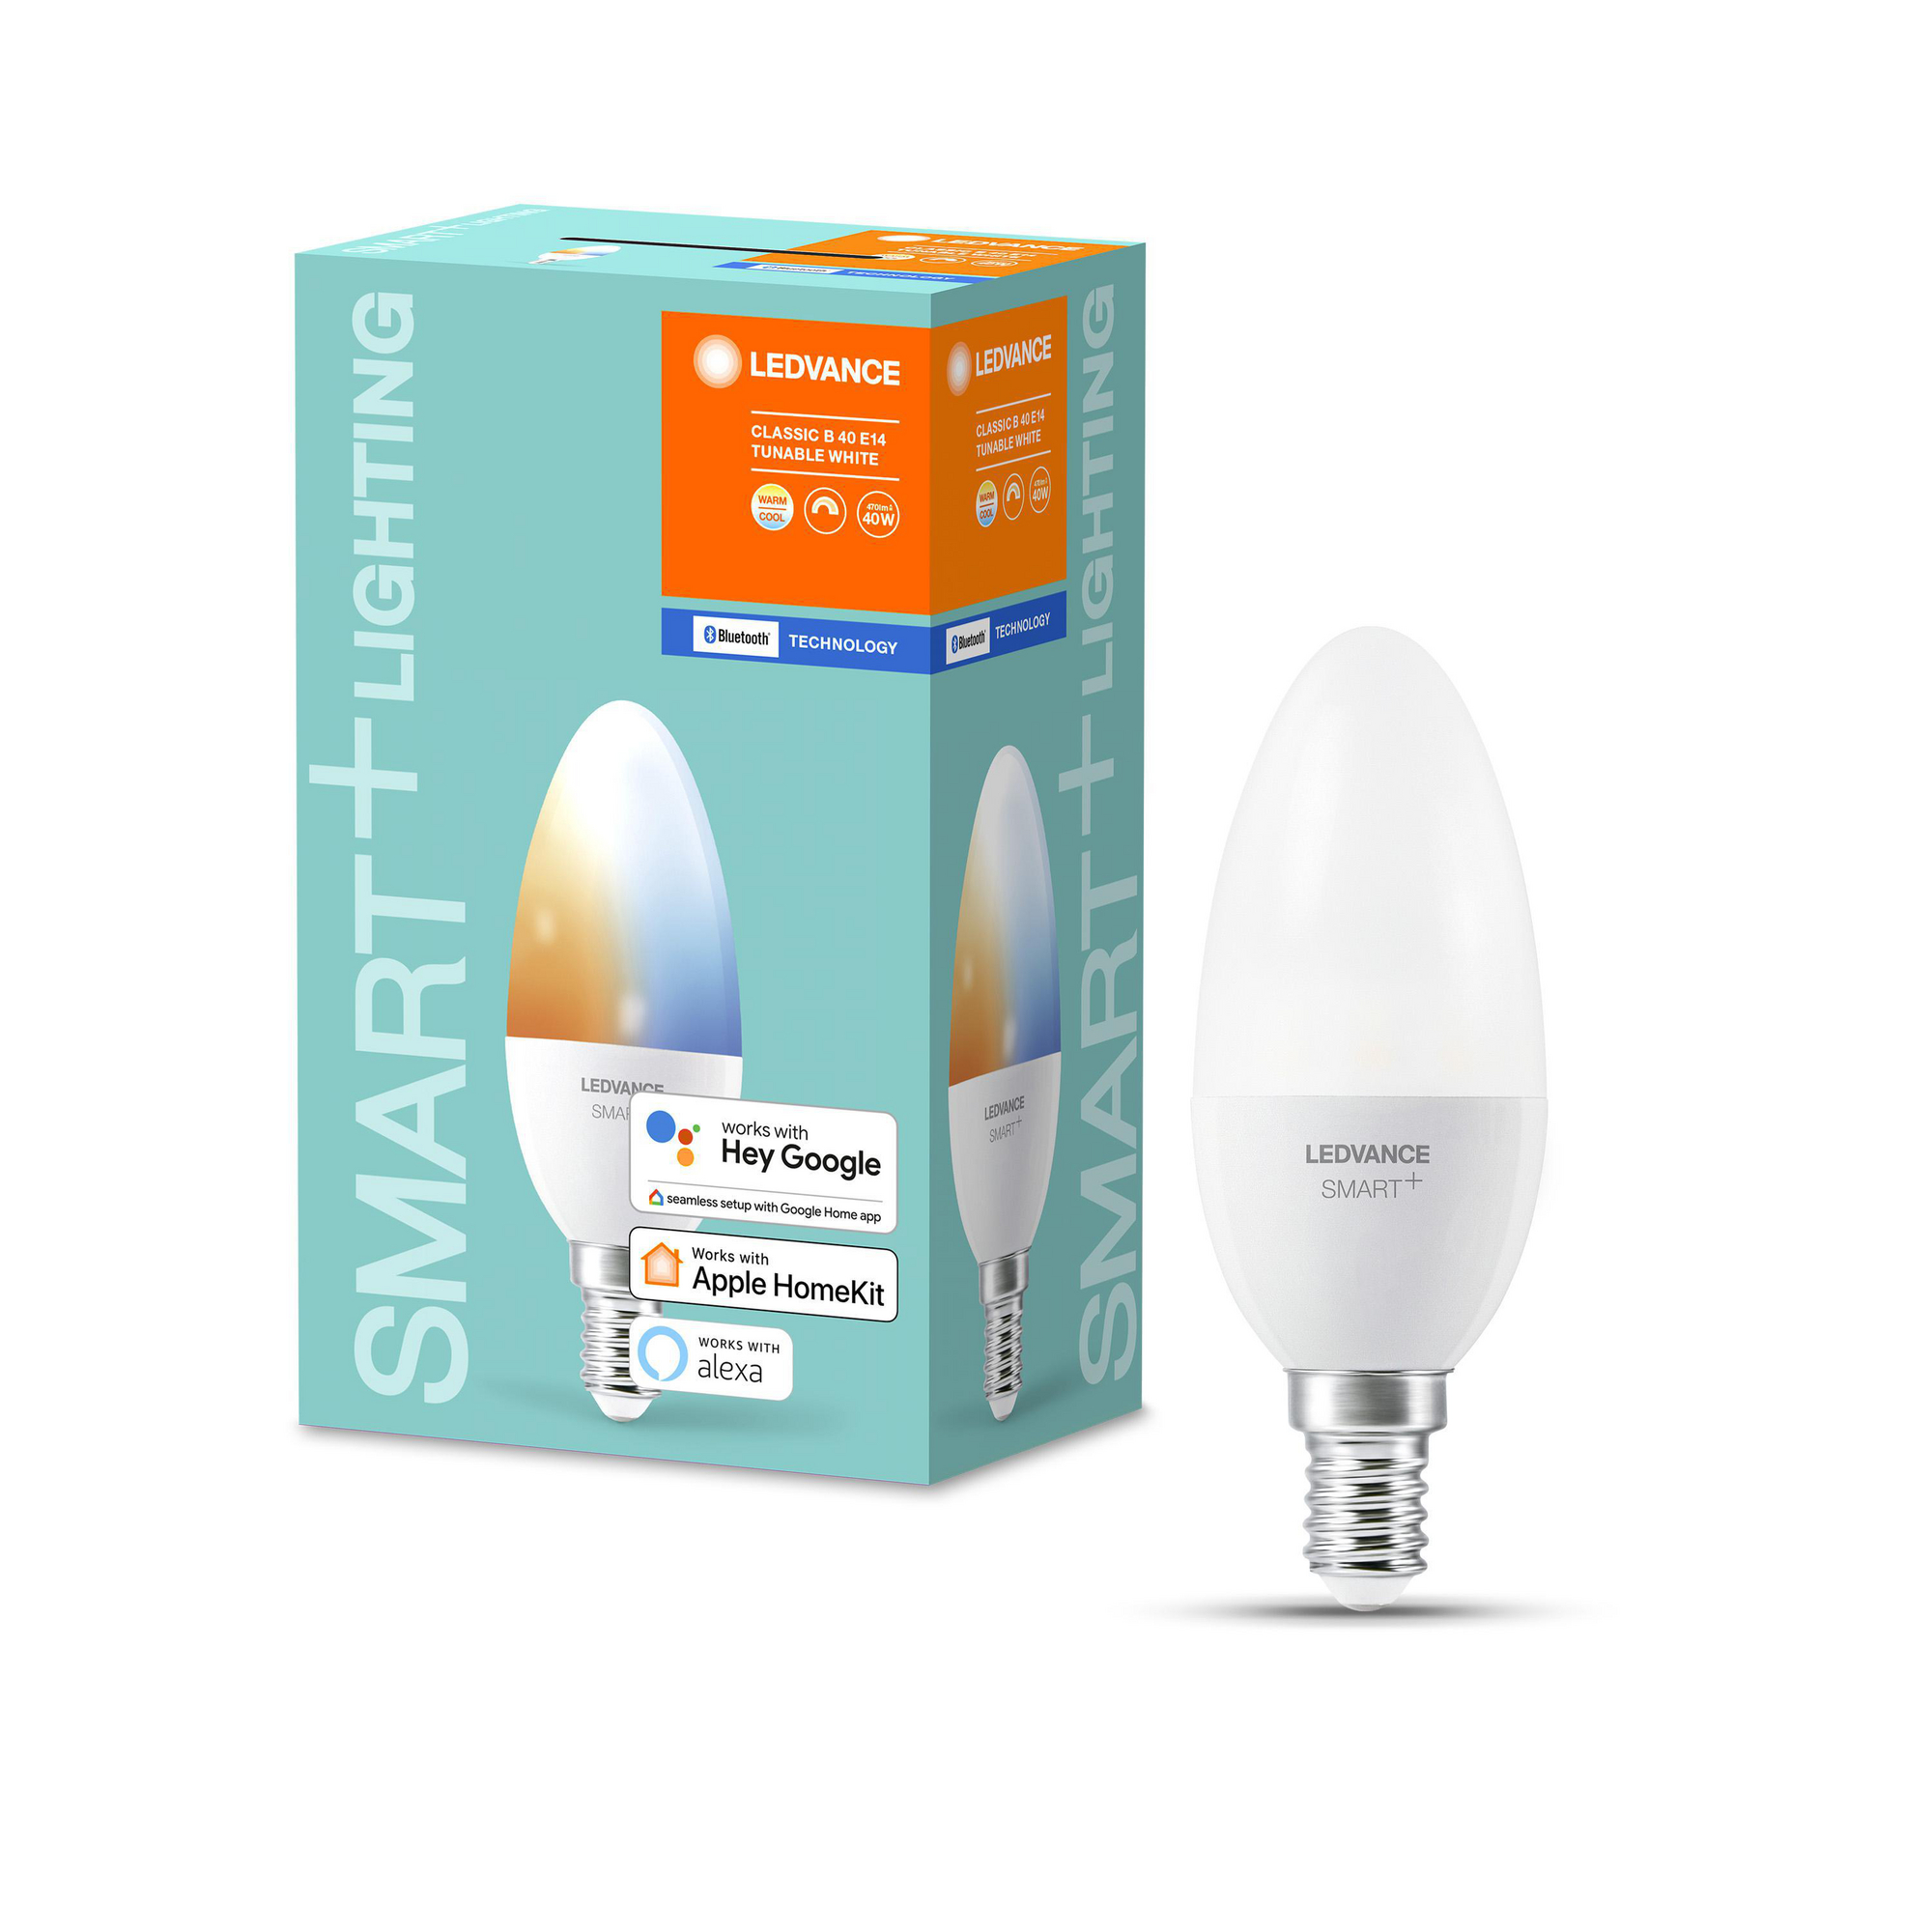 LED-Lampe 'Smart+' 11,4 cm 470 lm 5 W E14 weiß Bluetooth Tunable White + product picture